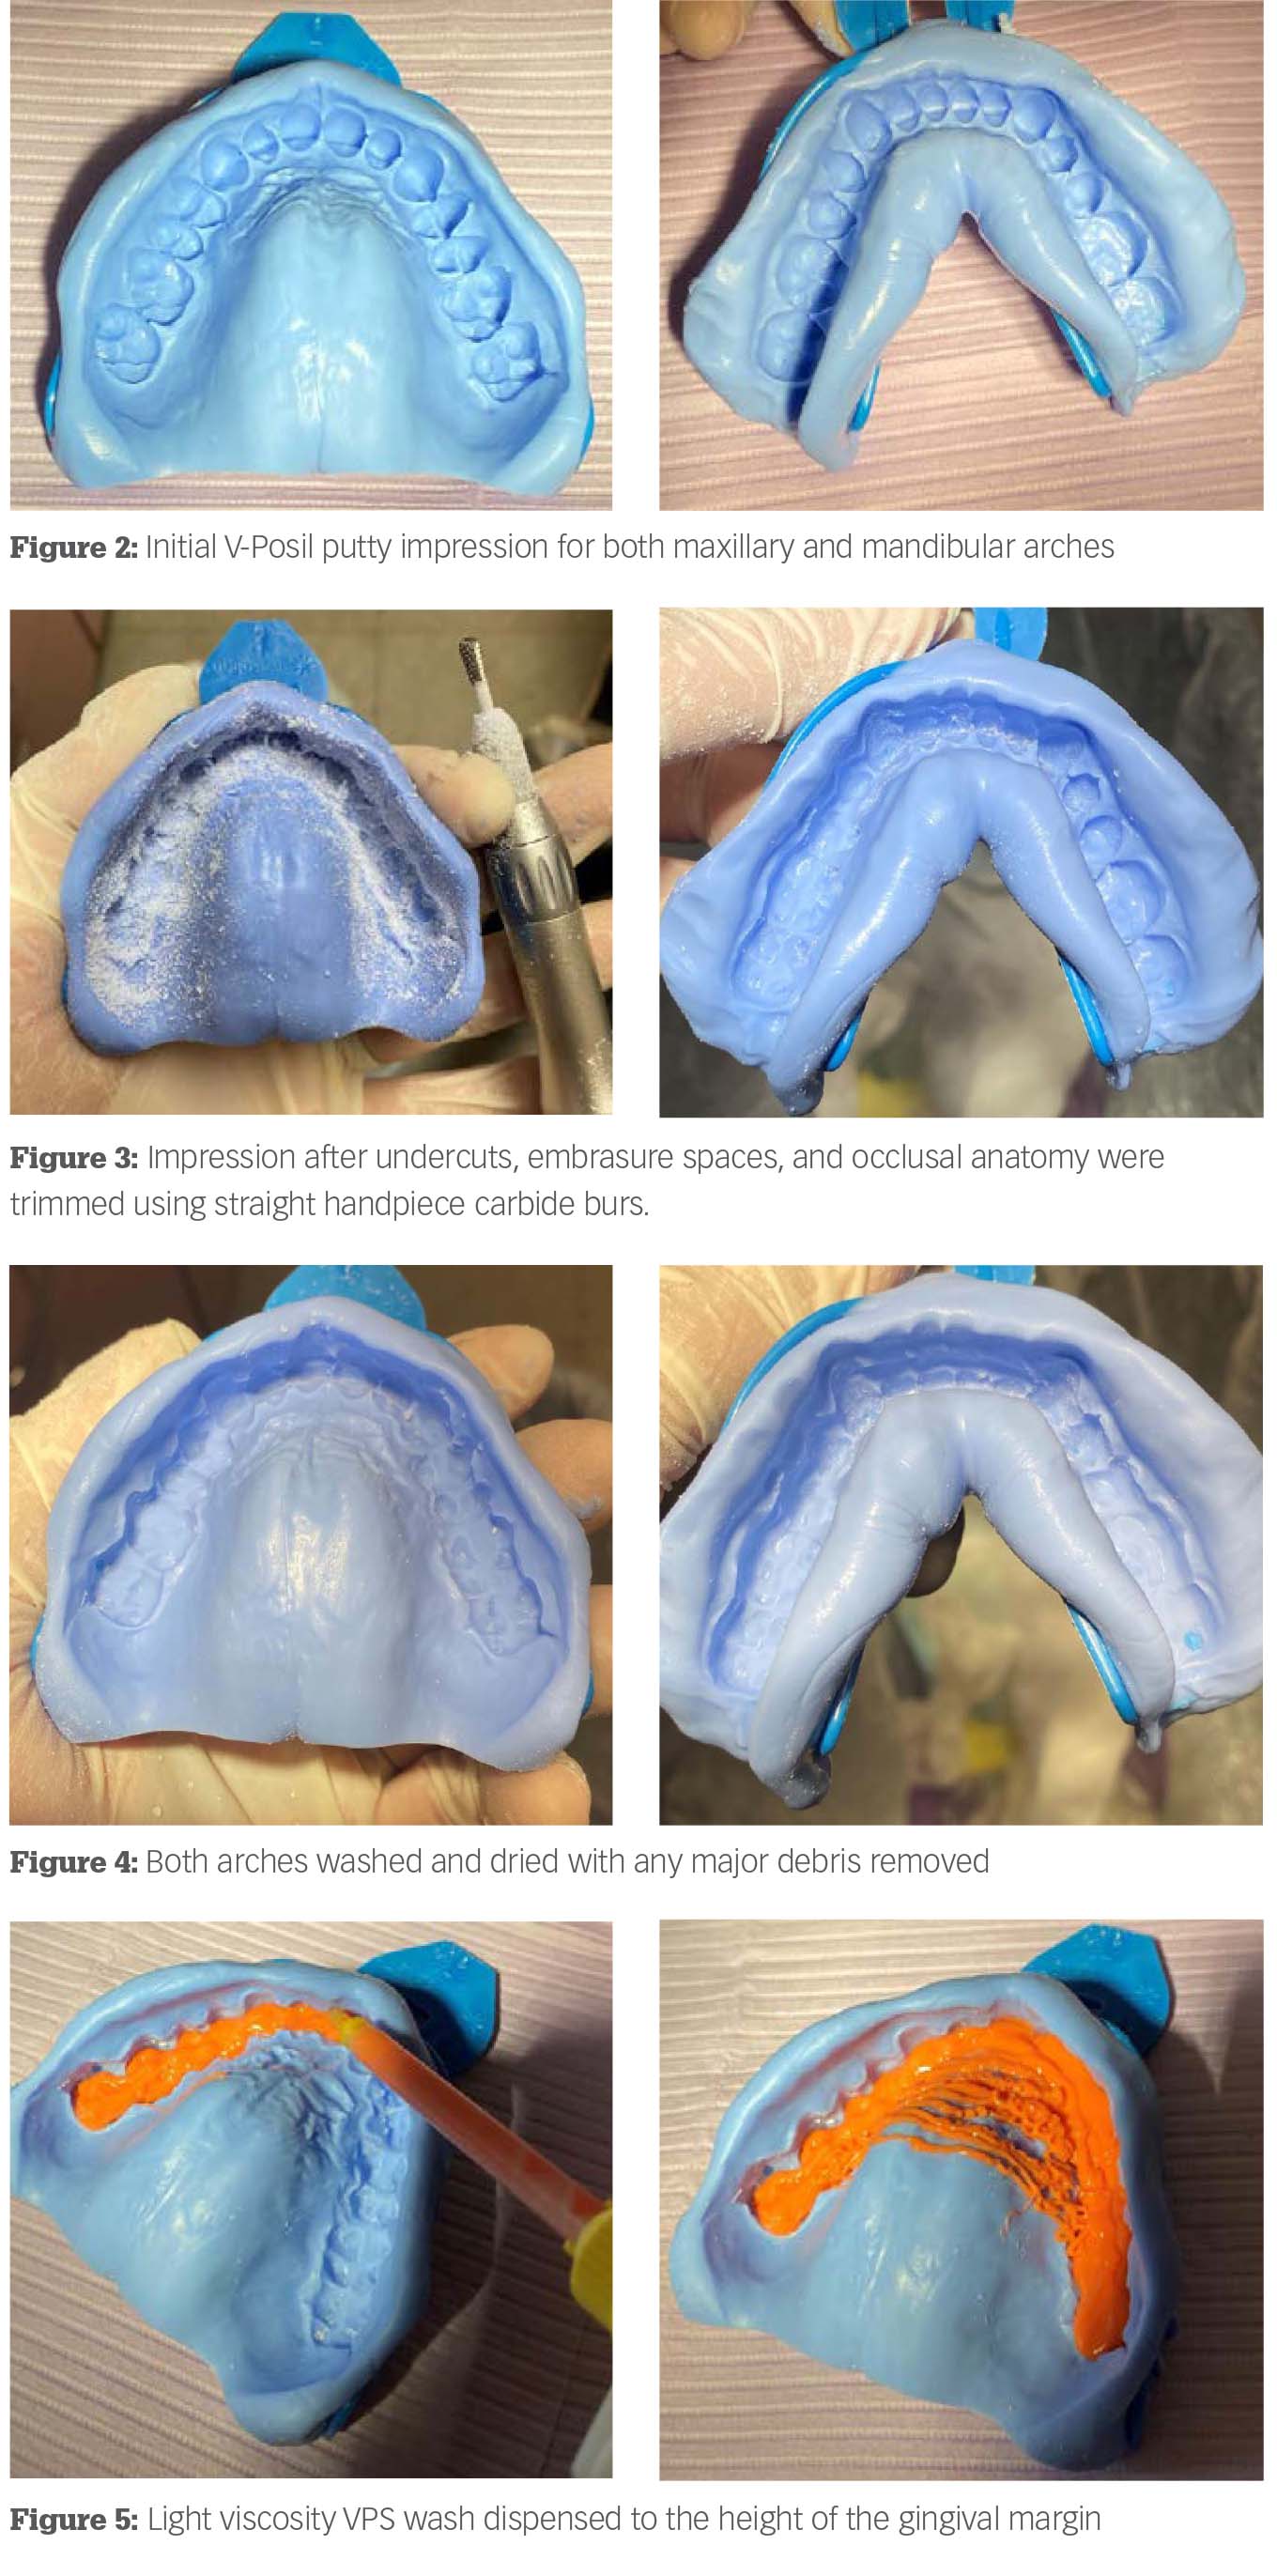 Better orthodontic impressions with the putty + wash method